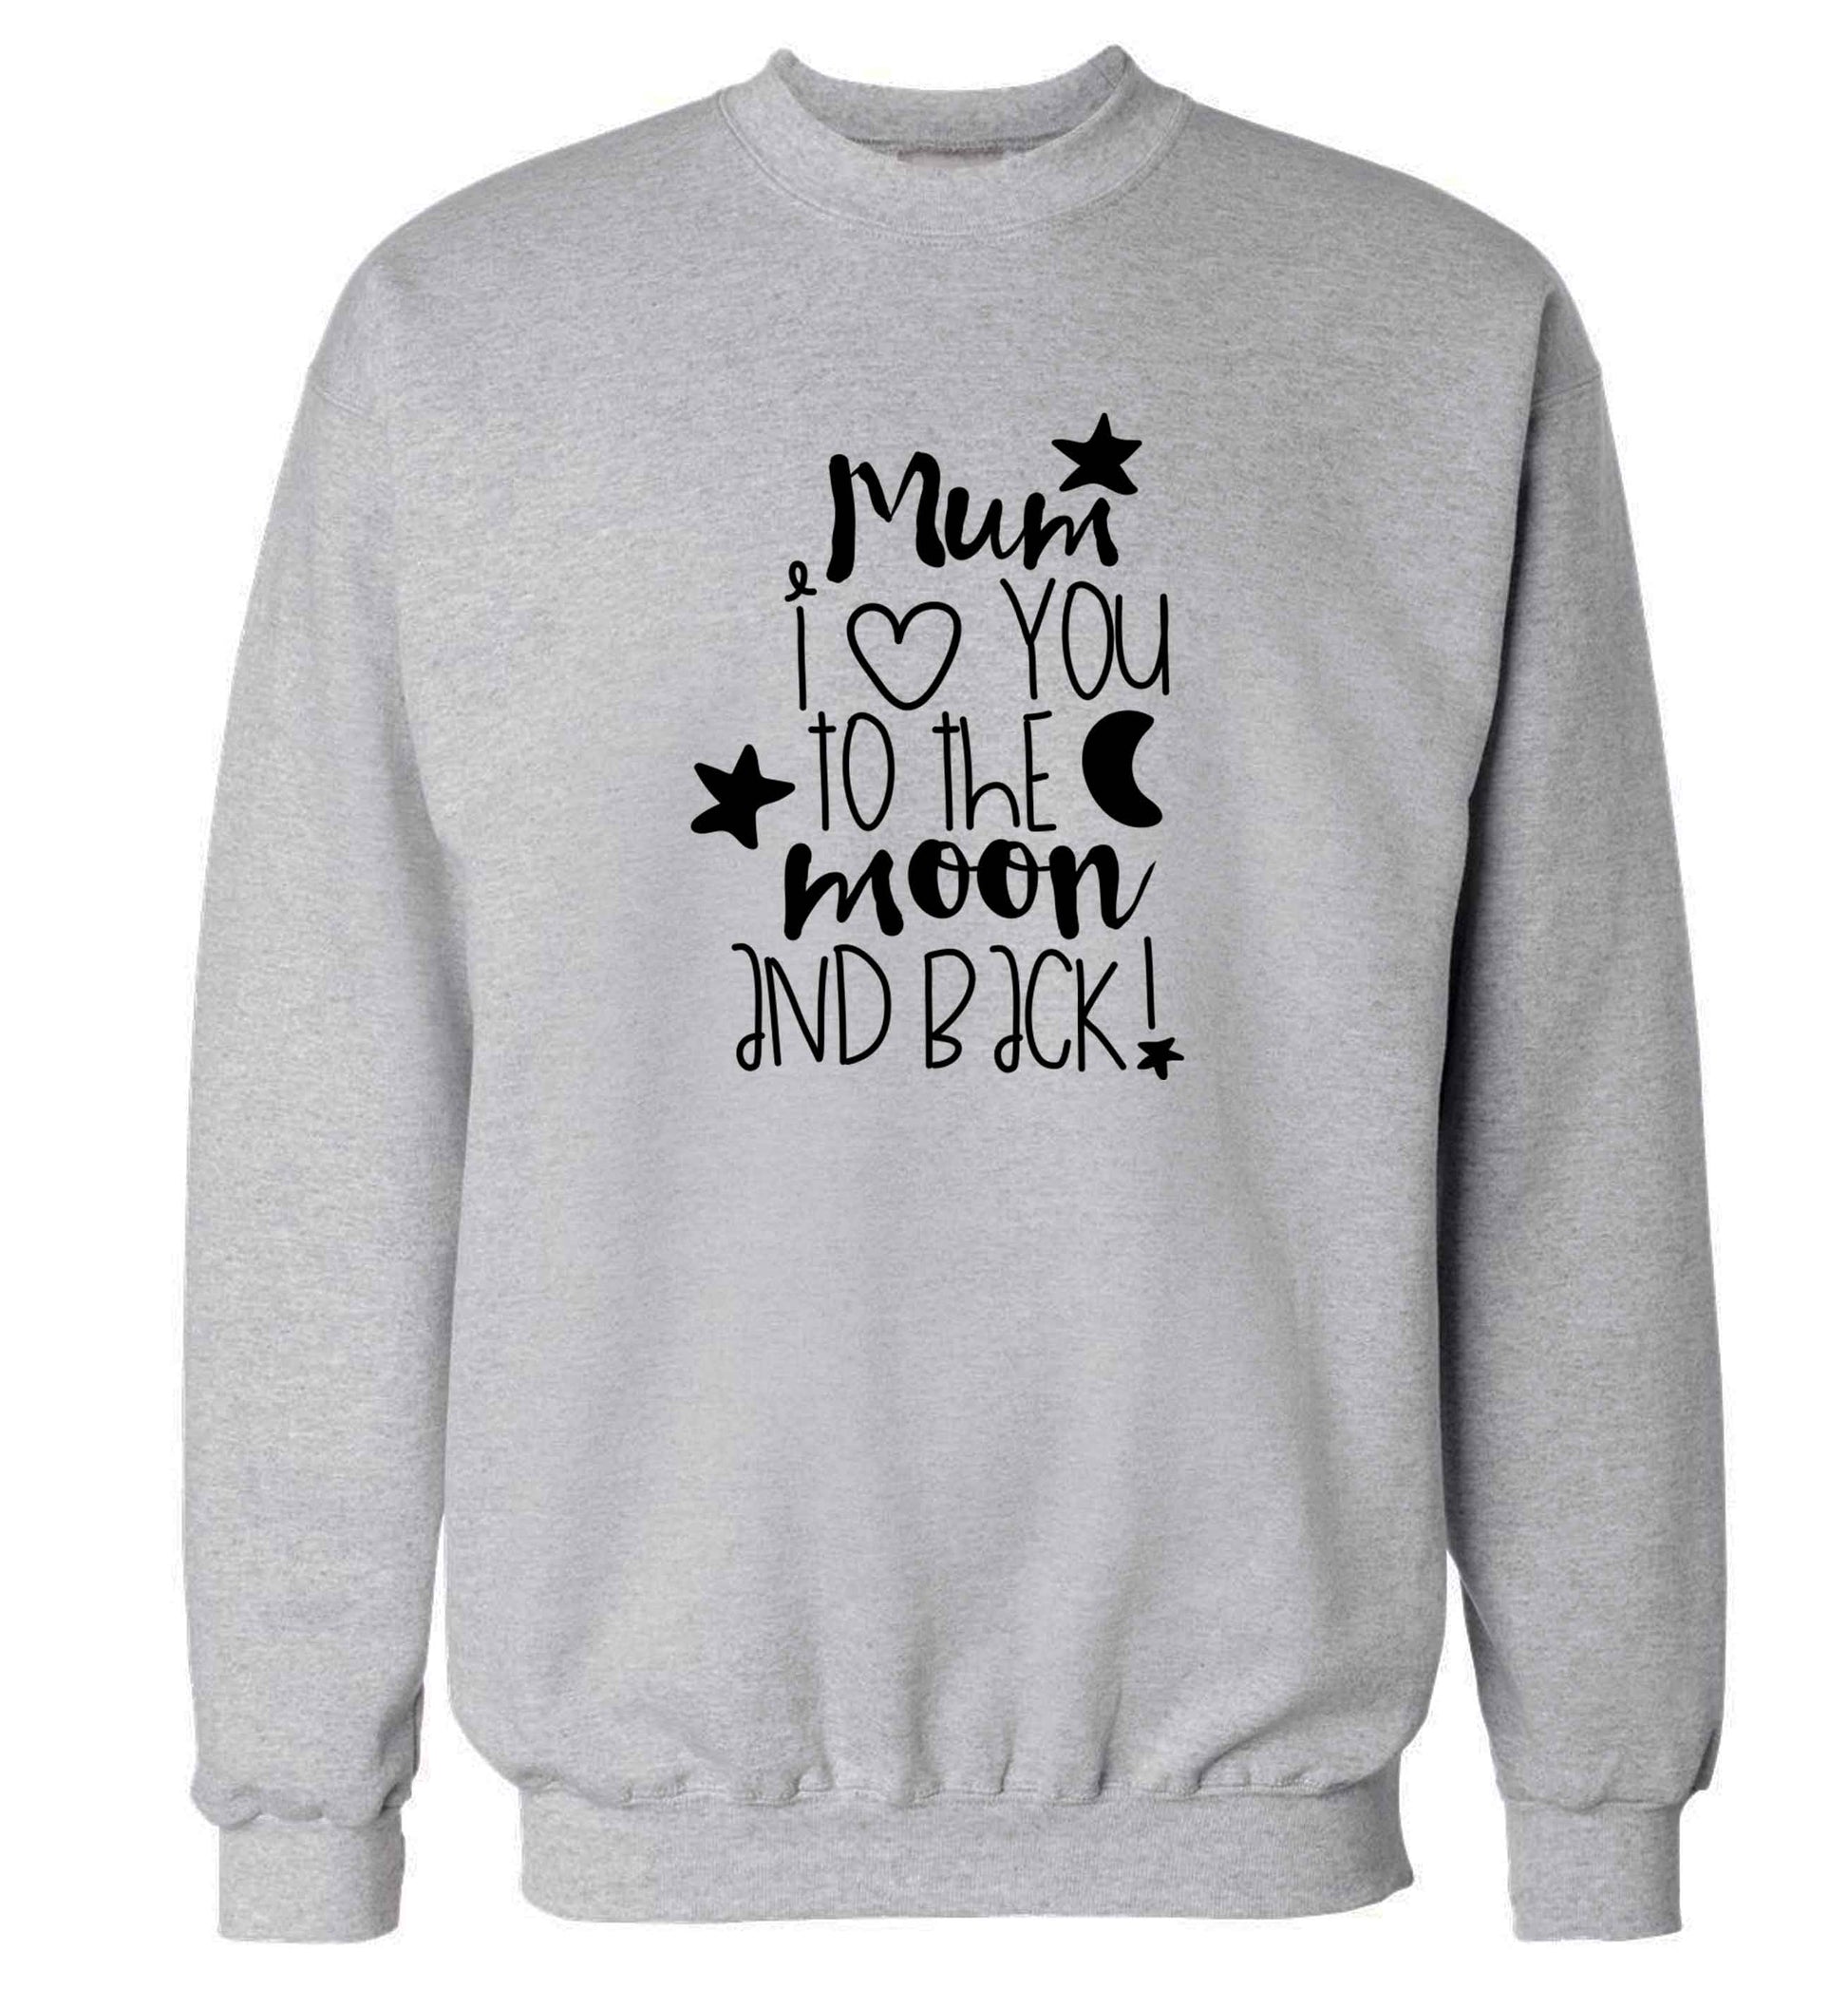 Mum I love you to the moon and back adult's unisex grey sweater 2XL